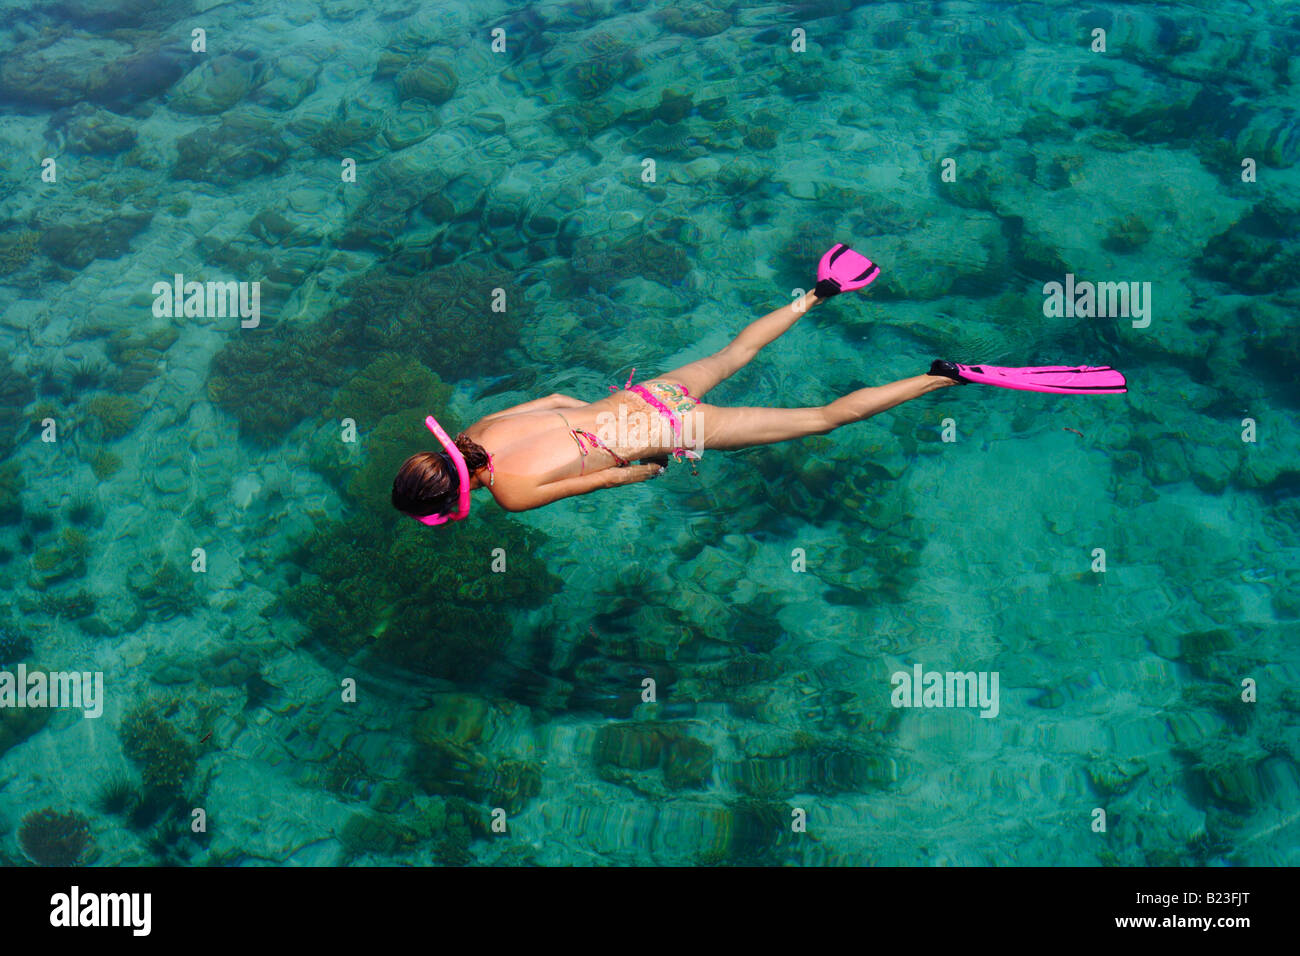 Snorkelling across corals in shallow water Mabul Island Sabah Malaysia Stock Photo